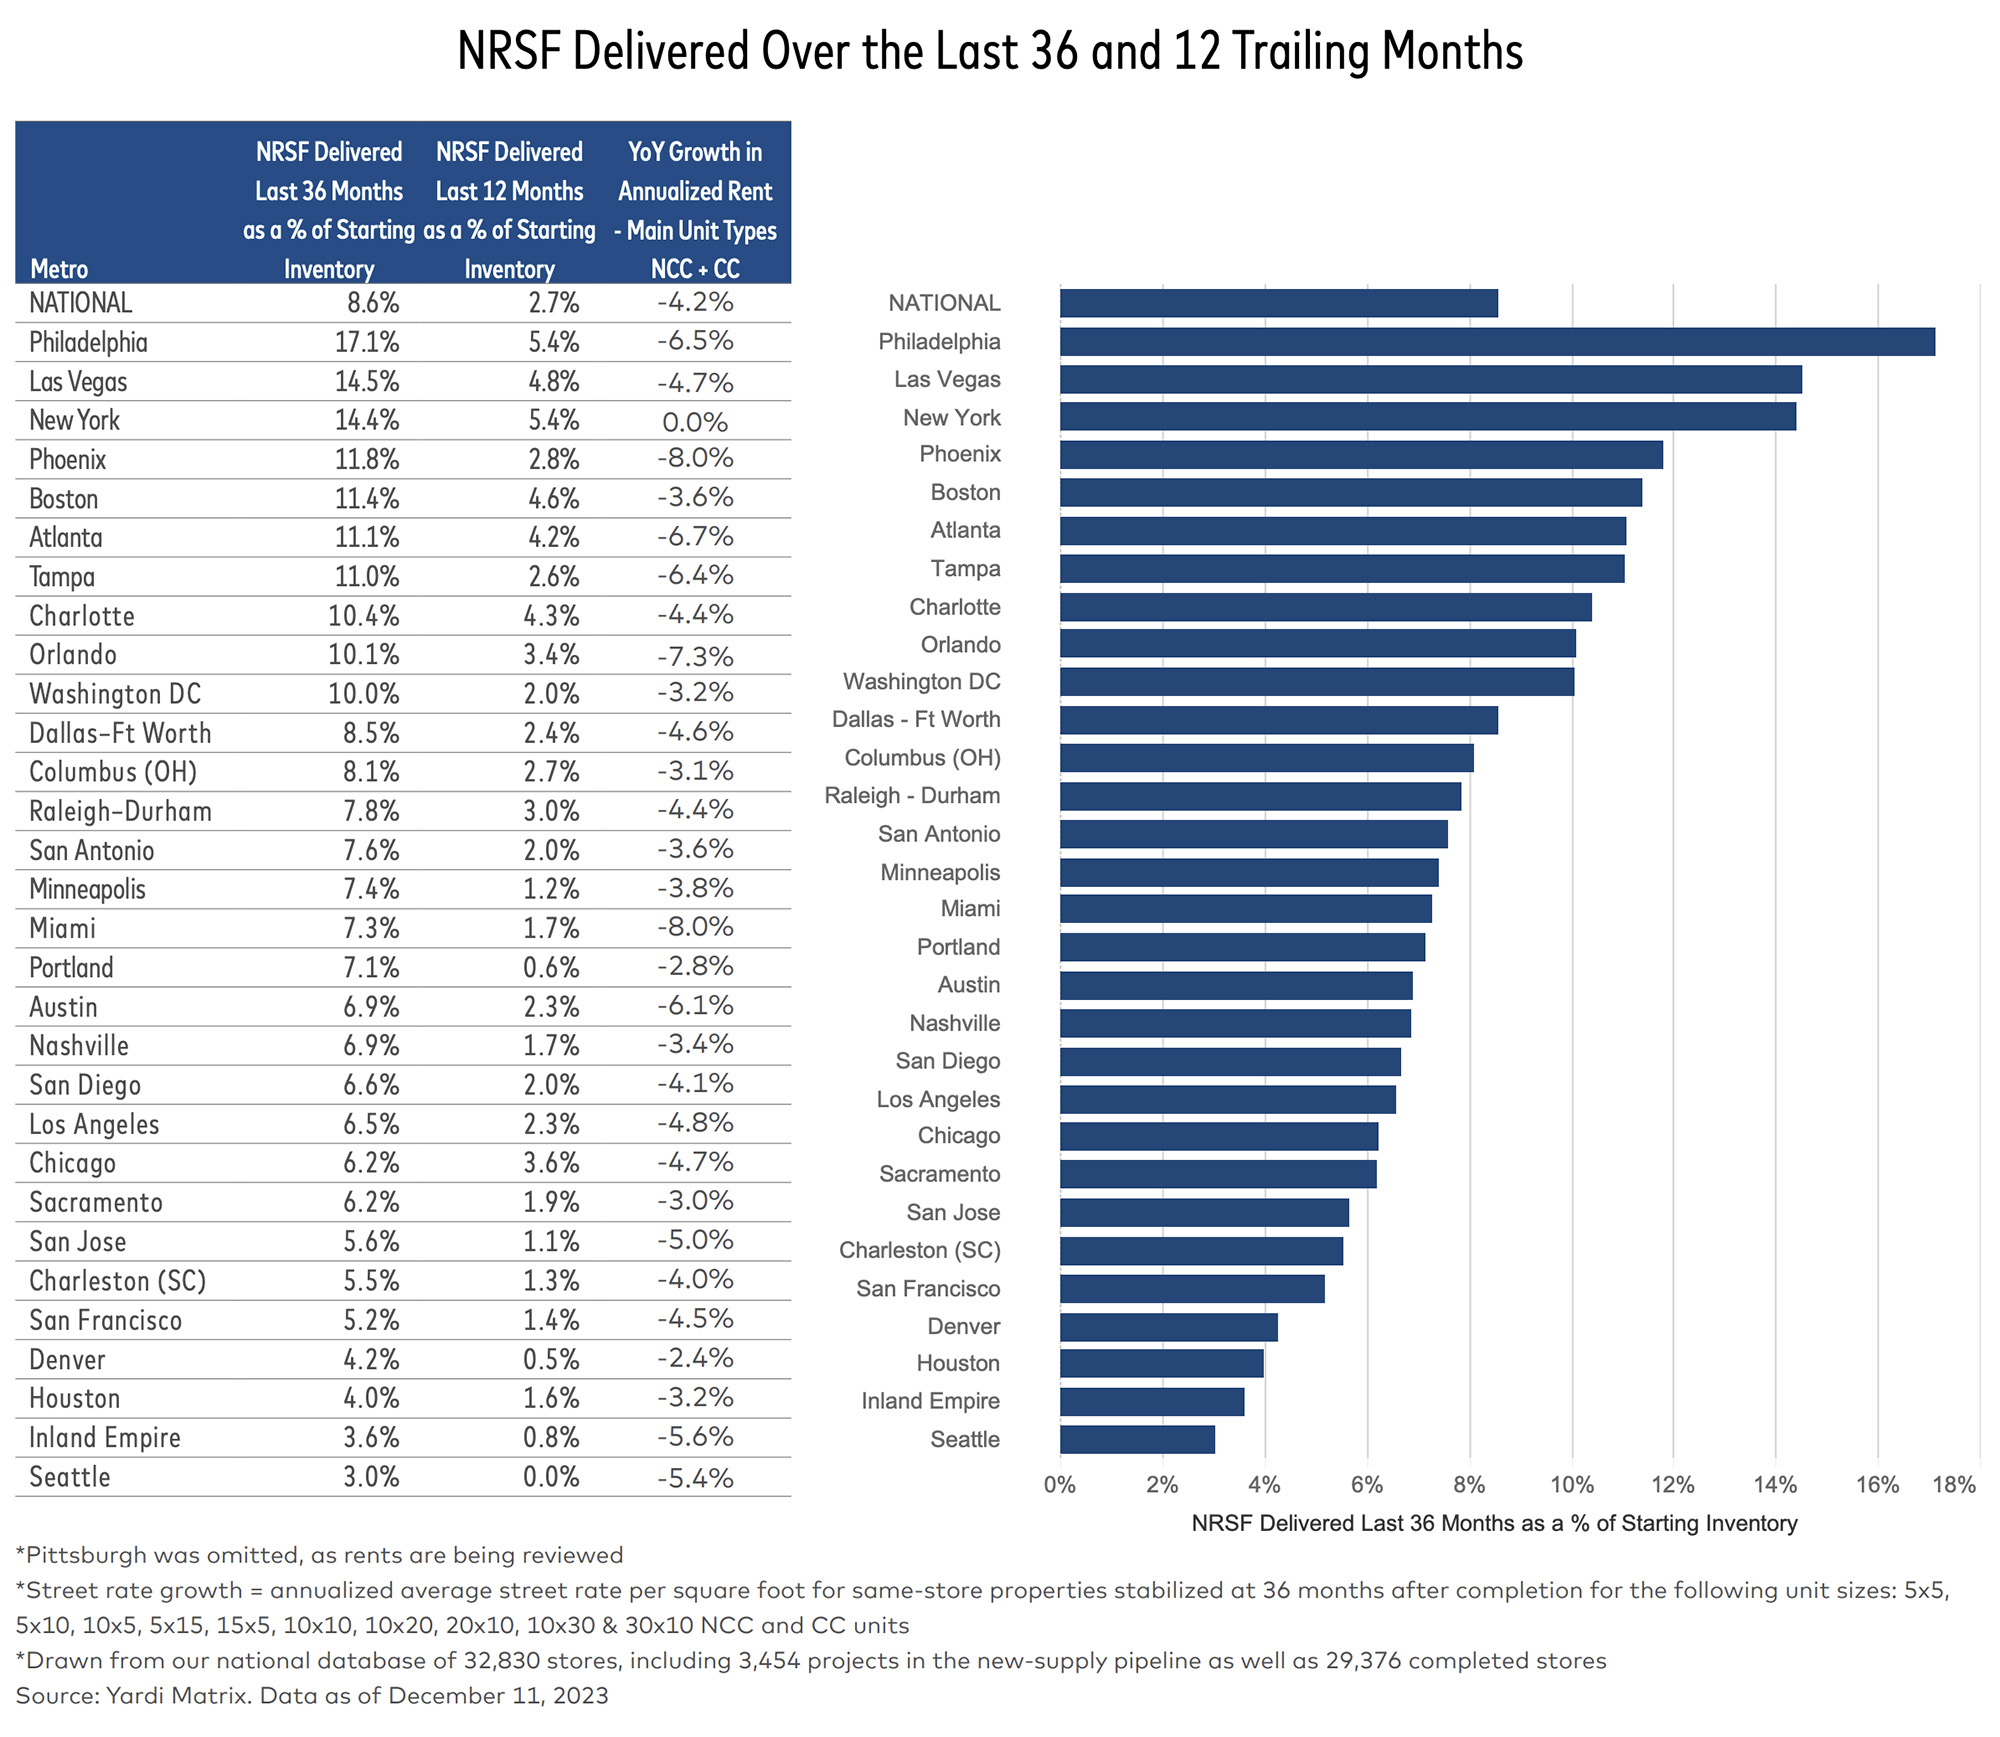 NRSF Delivered Over the Last 36 and 12 Trailing Months